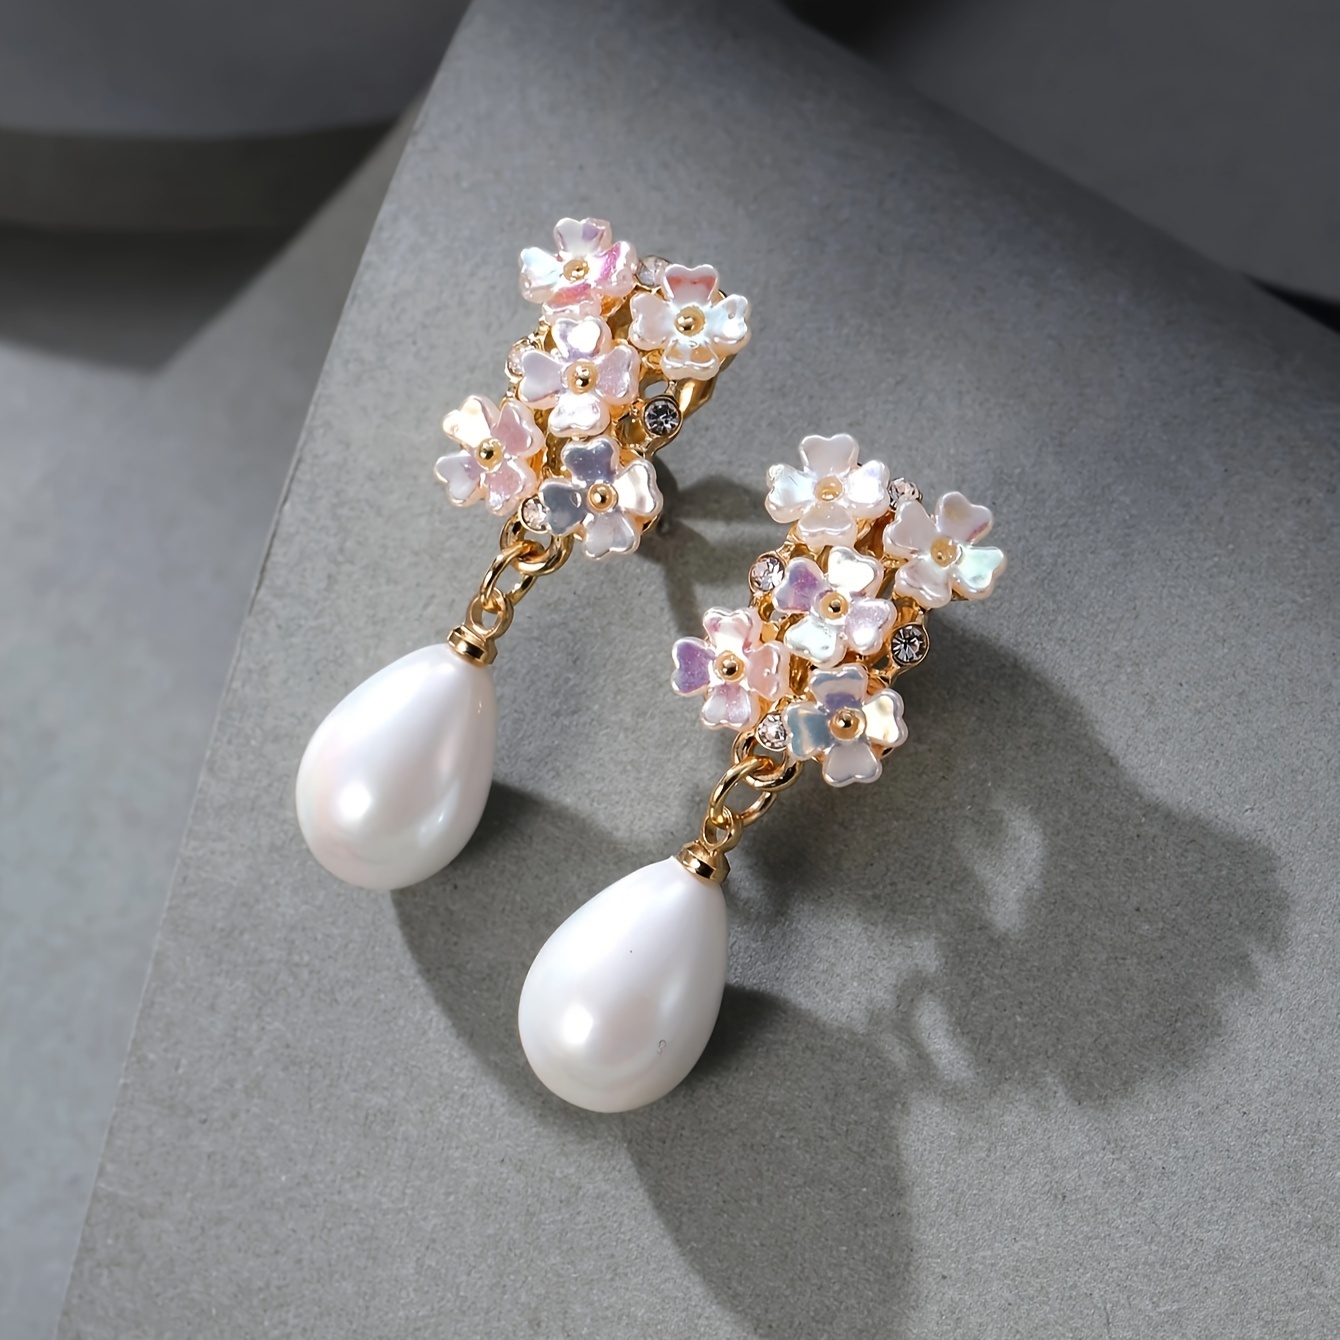 

Exquisite Shiny Flower With Imitation Pearl Design Clip On Earrings Zinc Alloy Plated Jewelry For Women Wedding Party Earrings